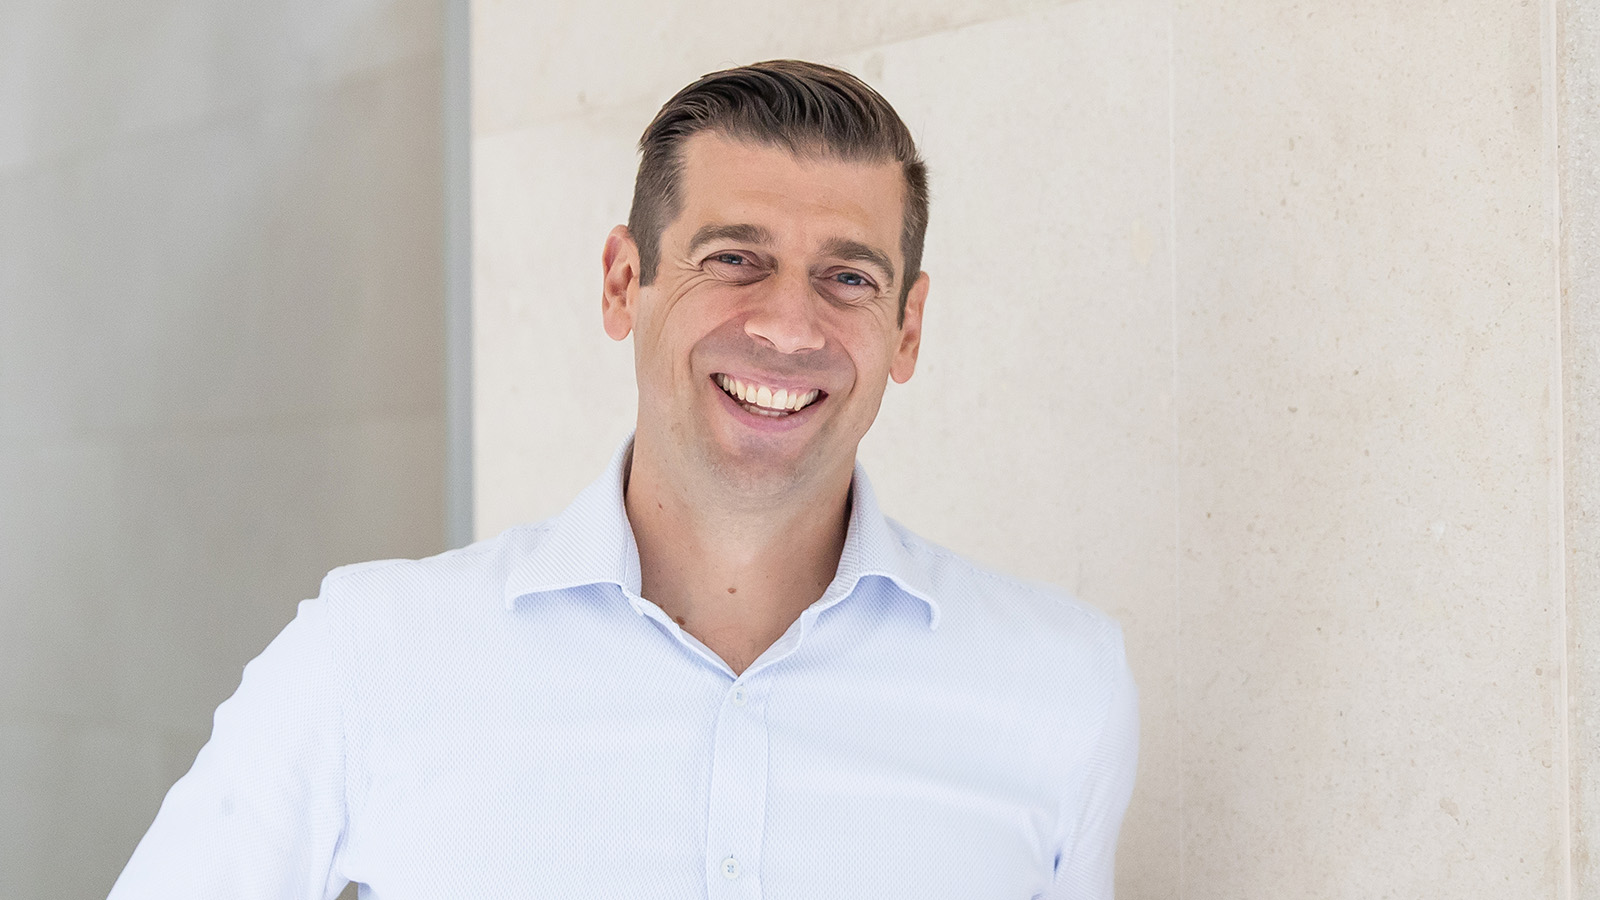 A man is wearing a white business shirt, smiling